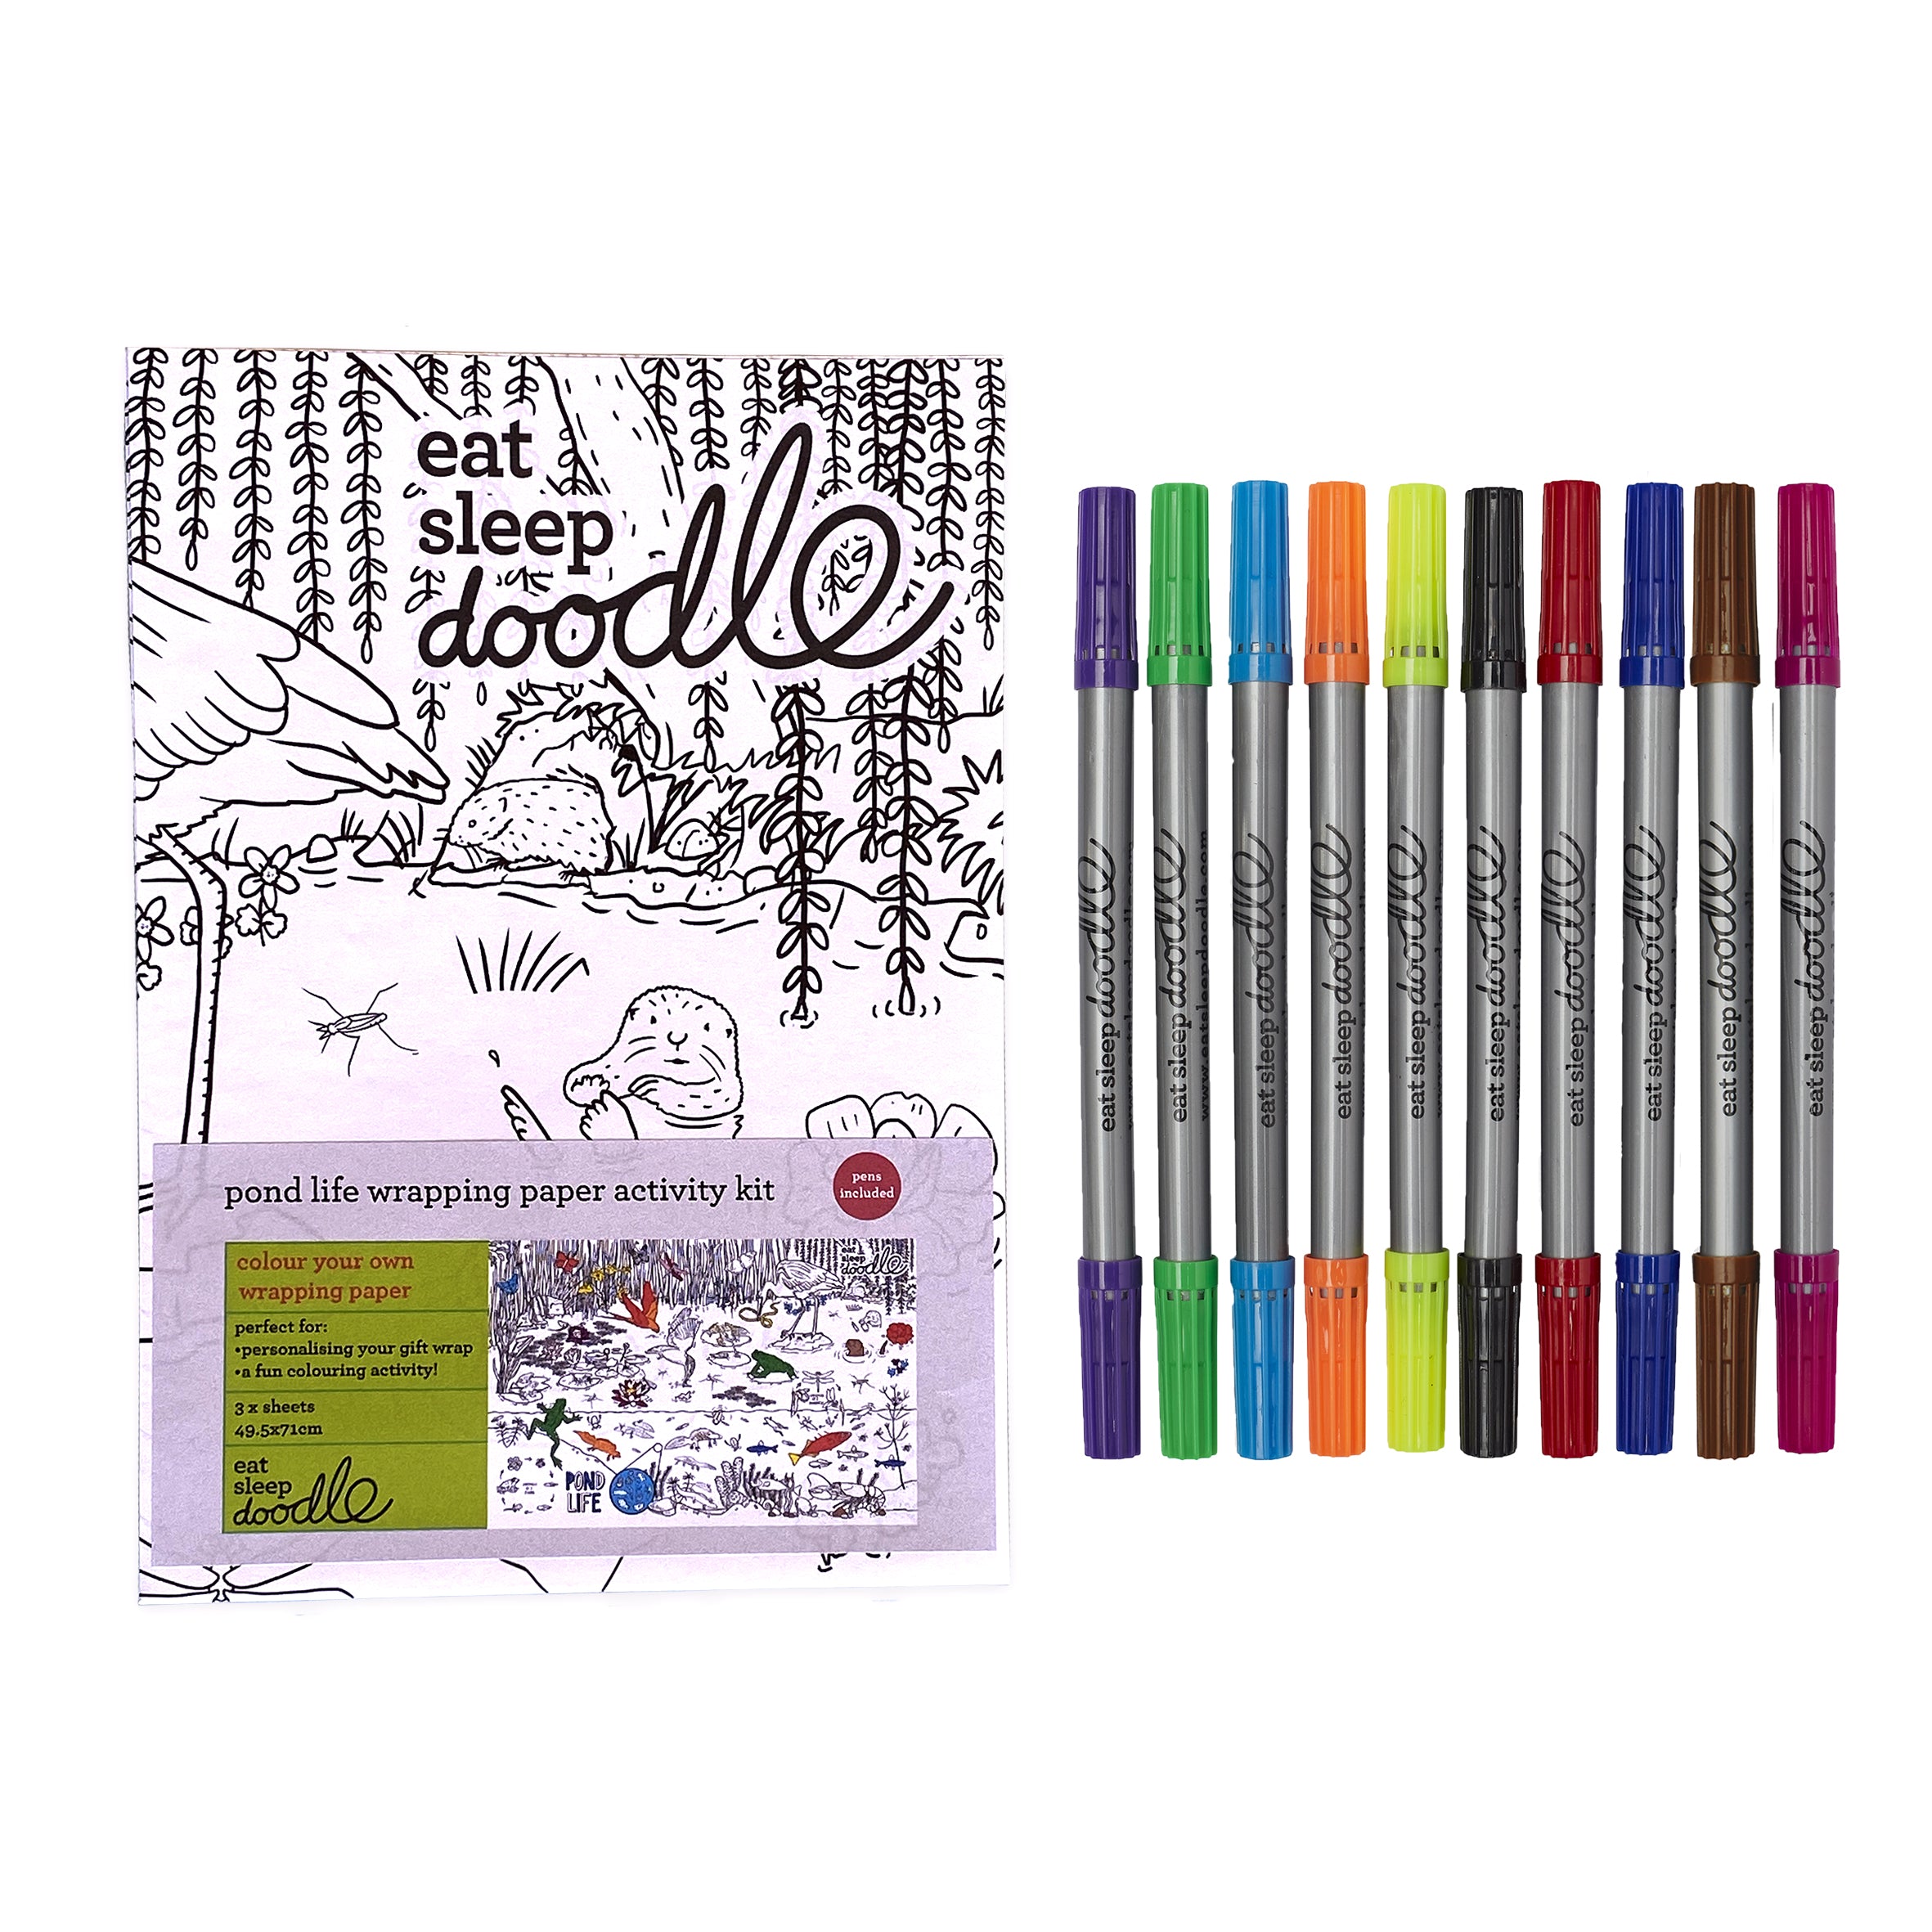 color in pond life wrapping paper activity kit – eatsleepdoodle (USA)